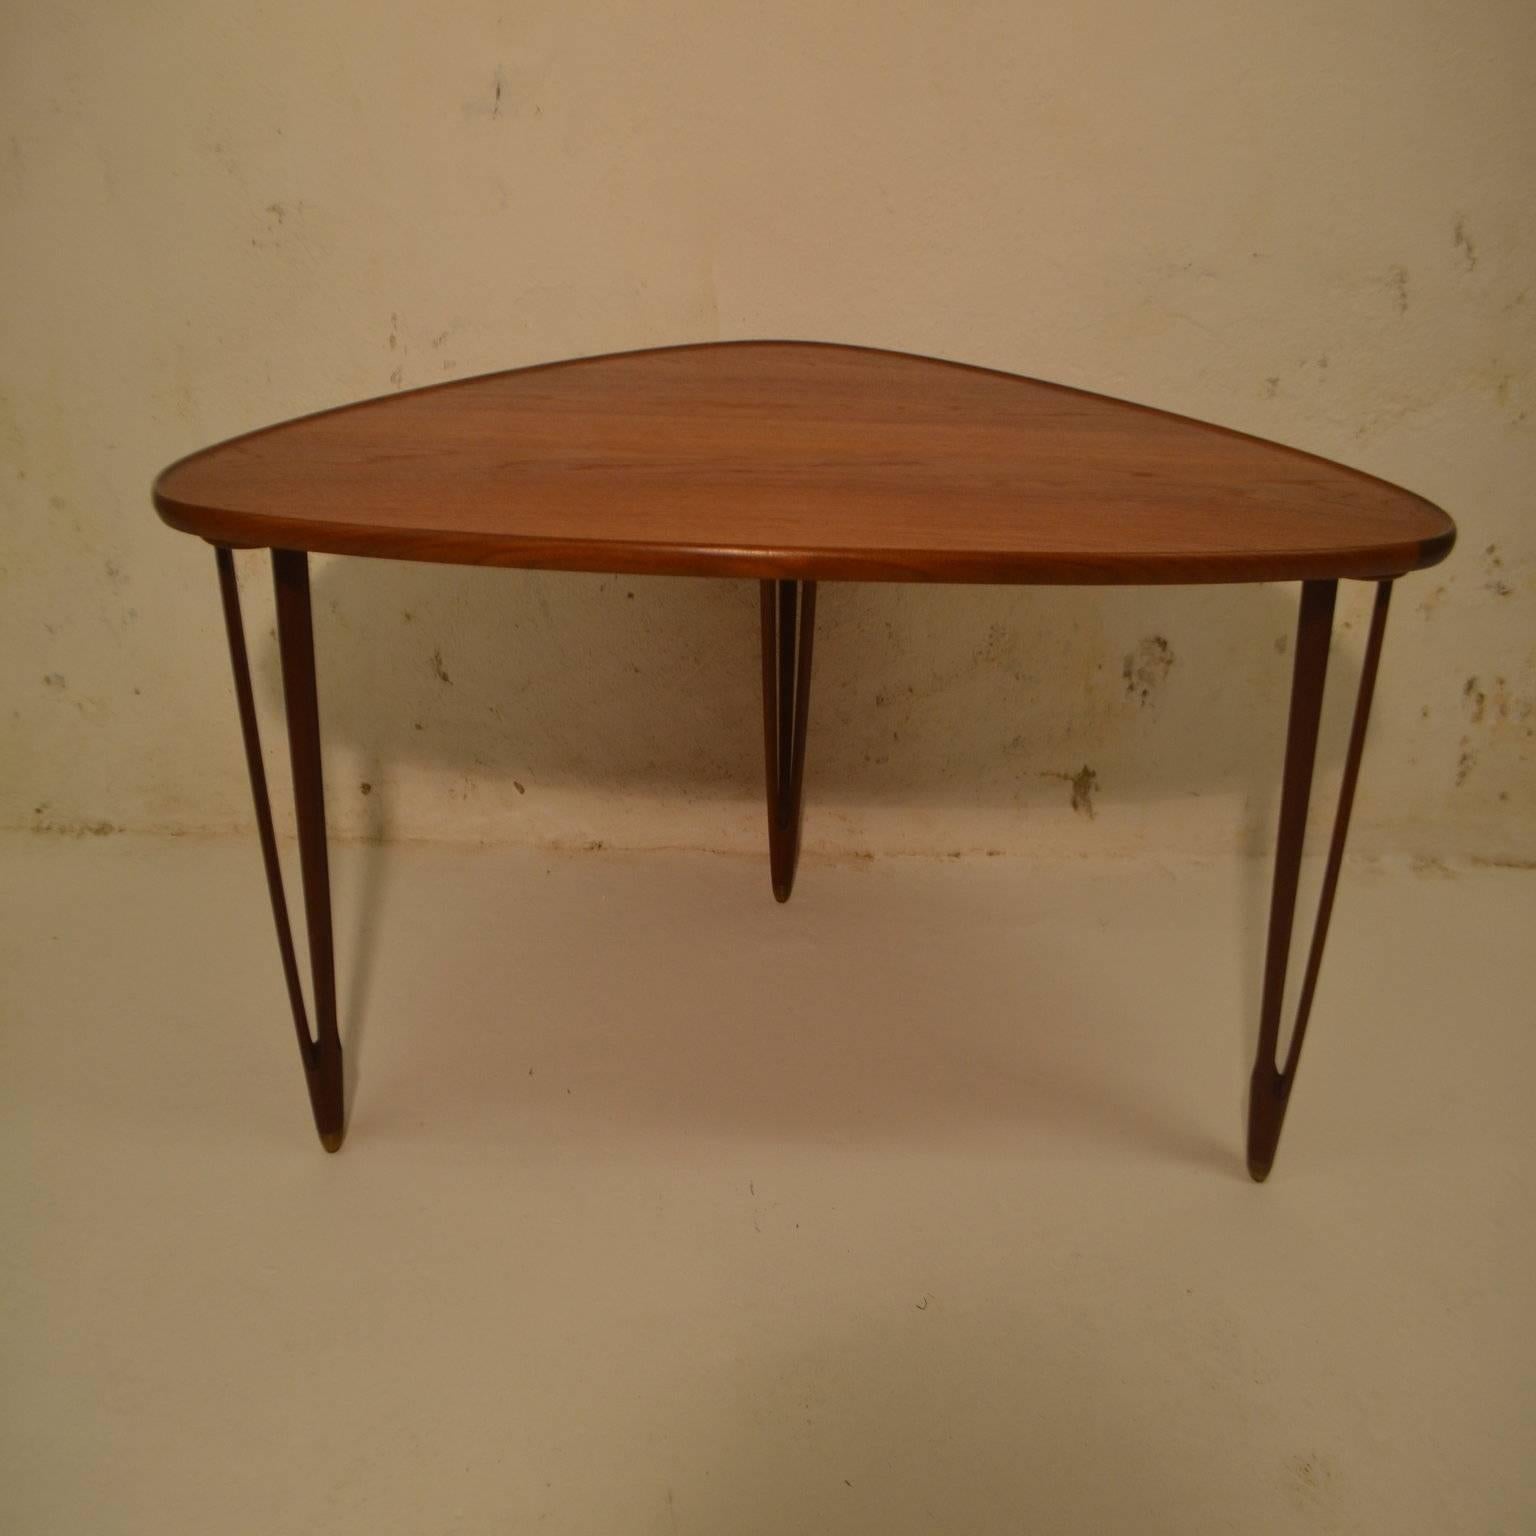 Mid-20th Century Danish Teak Coffee Table by B C Mobler, Denmark For Sale